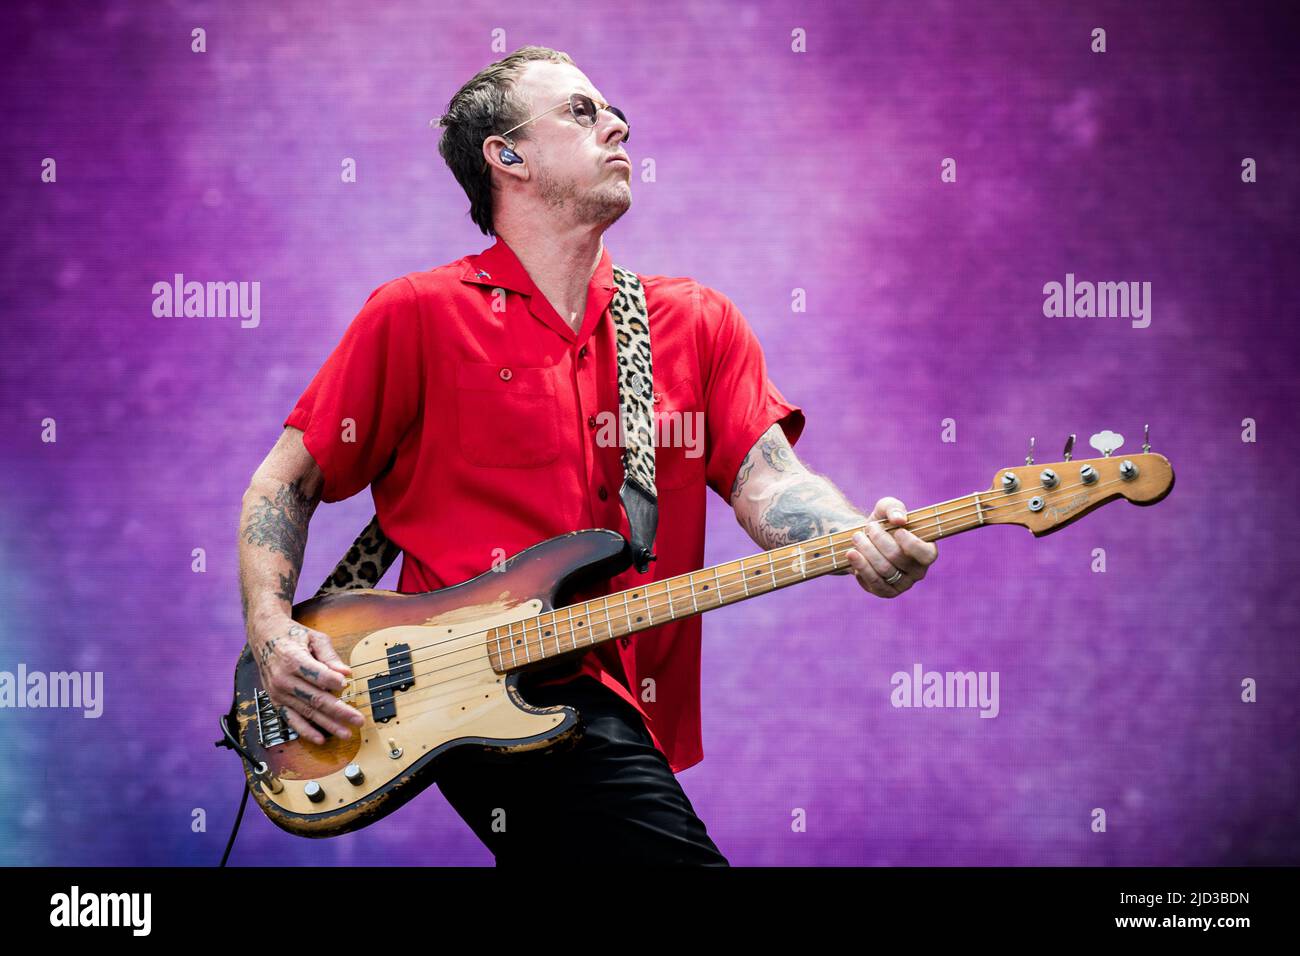 ITALY, MILAN, JUNE 15TH 2022: Scott Shriner, bassist of the American alternative rock band WEEZER preforms live on stage at Ippodromo SNAI La Maura during the 'I-Days Festival 2022' Stock Photo